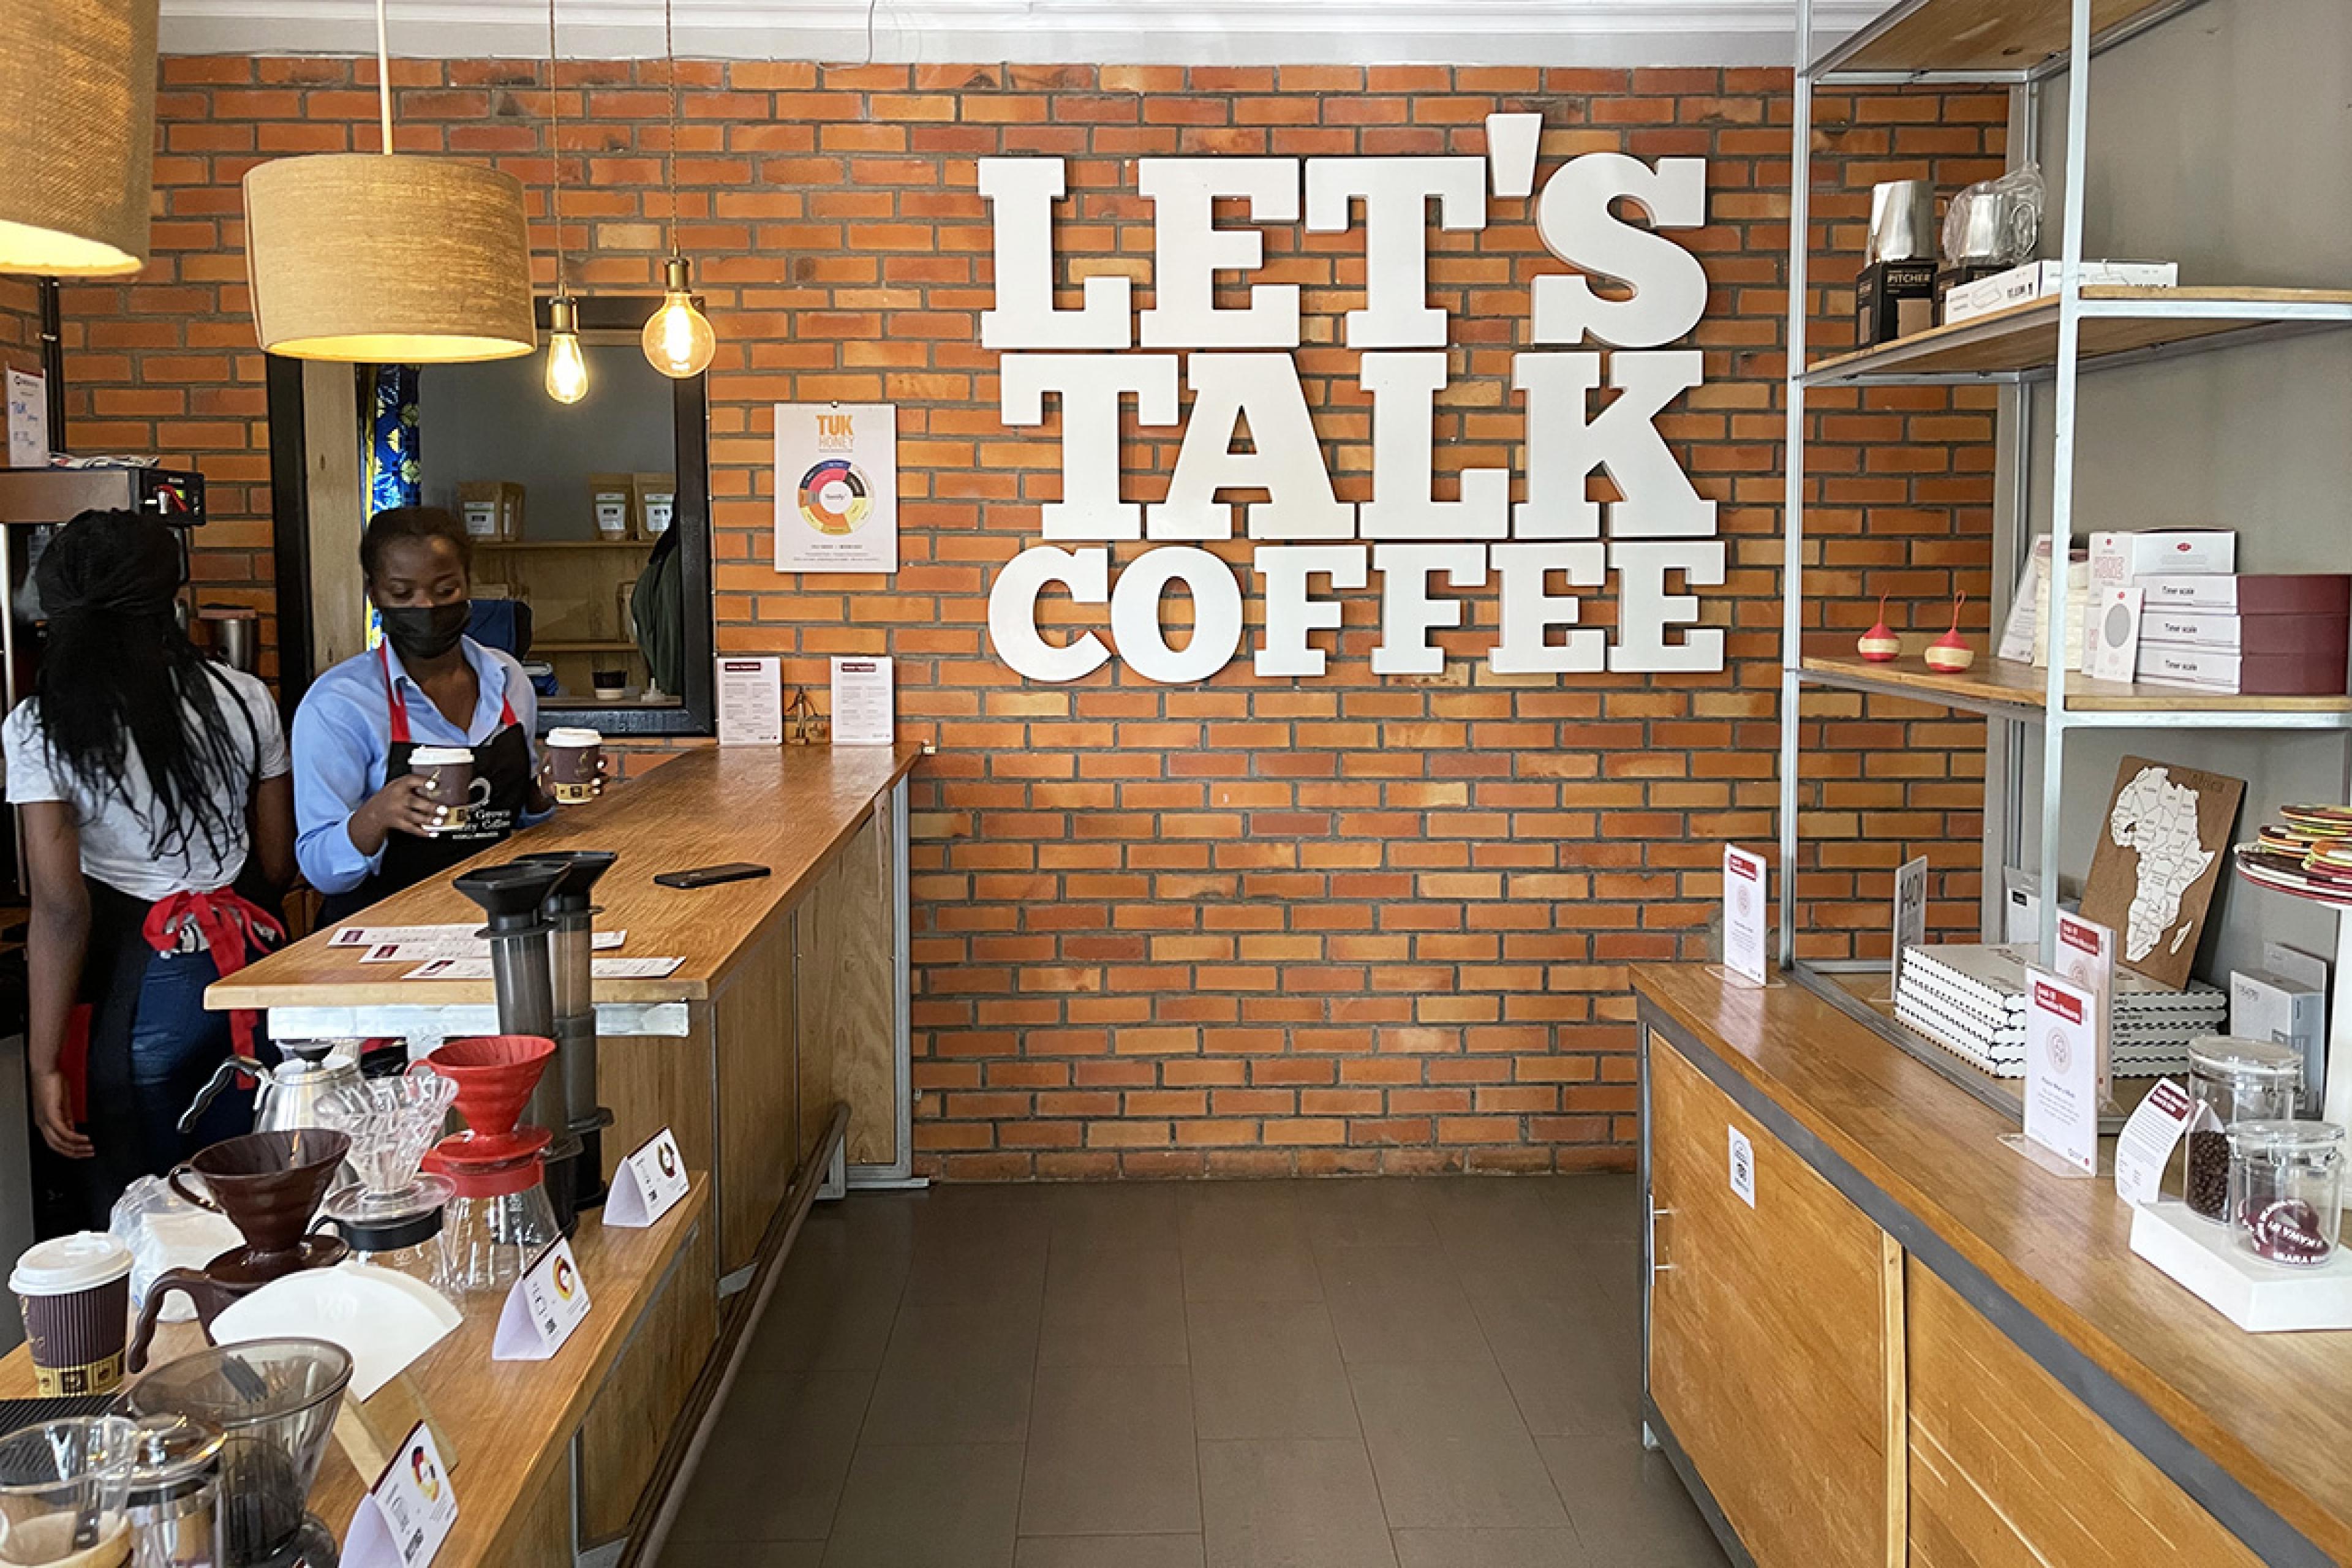 brick coffee shop interior with white lettering on the wall